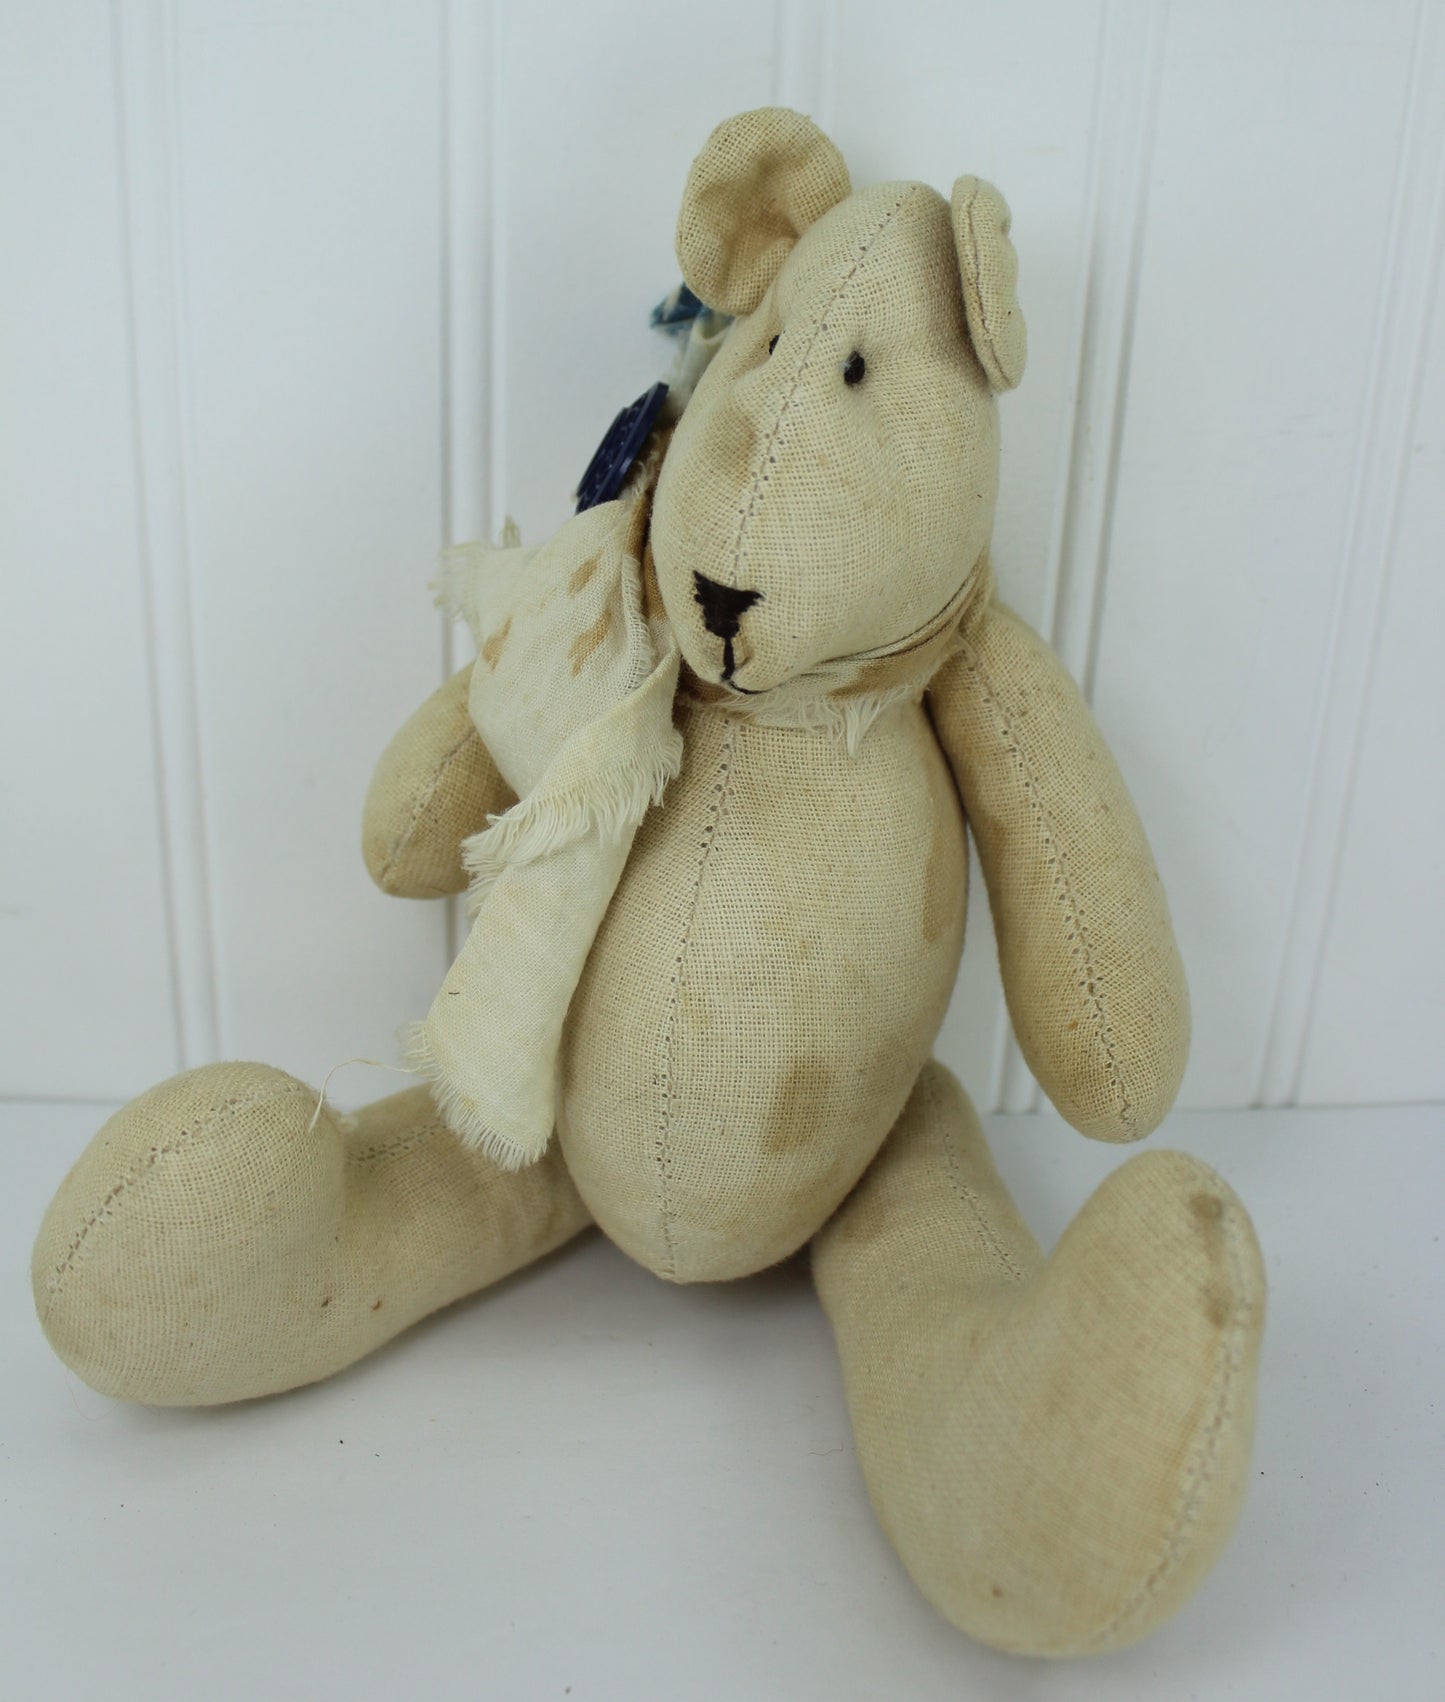 Vintage Hand Crafted Primitive Teddy Bears Old Quilted & Heavy Cotton Both Artisan Marked natural color cloth 